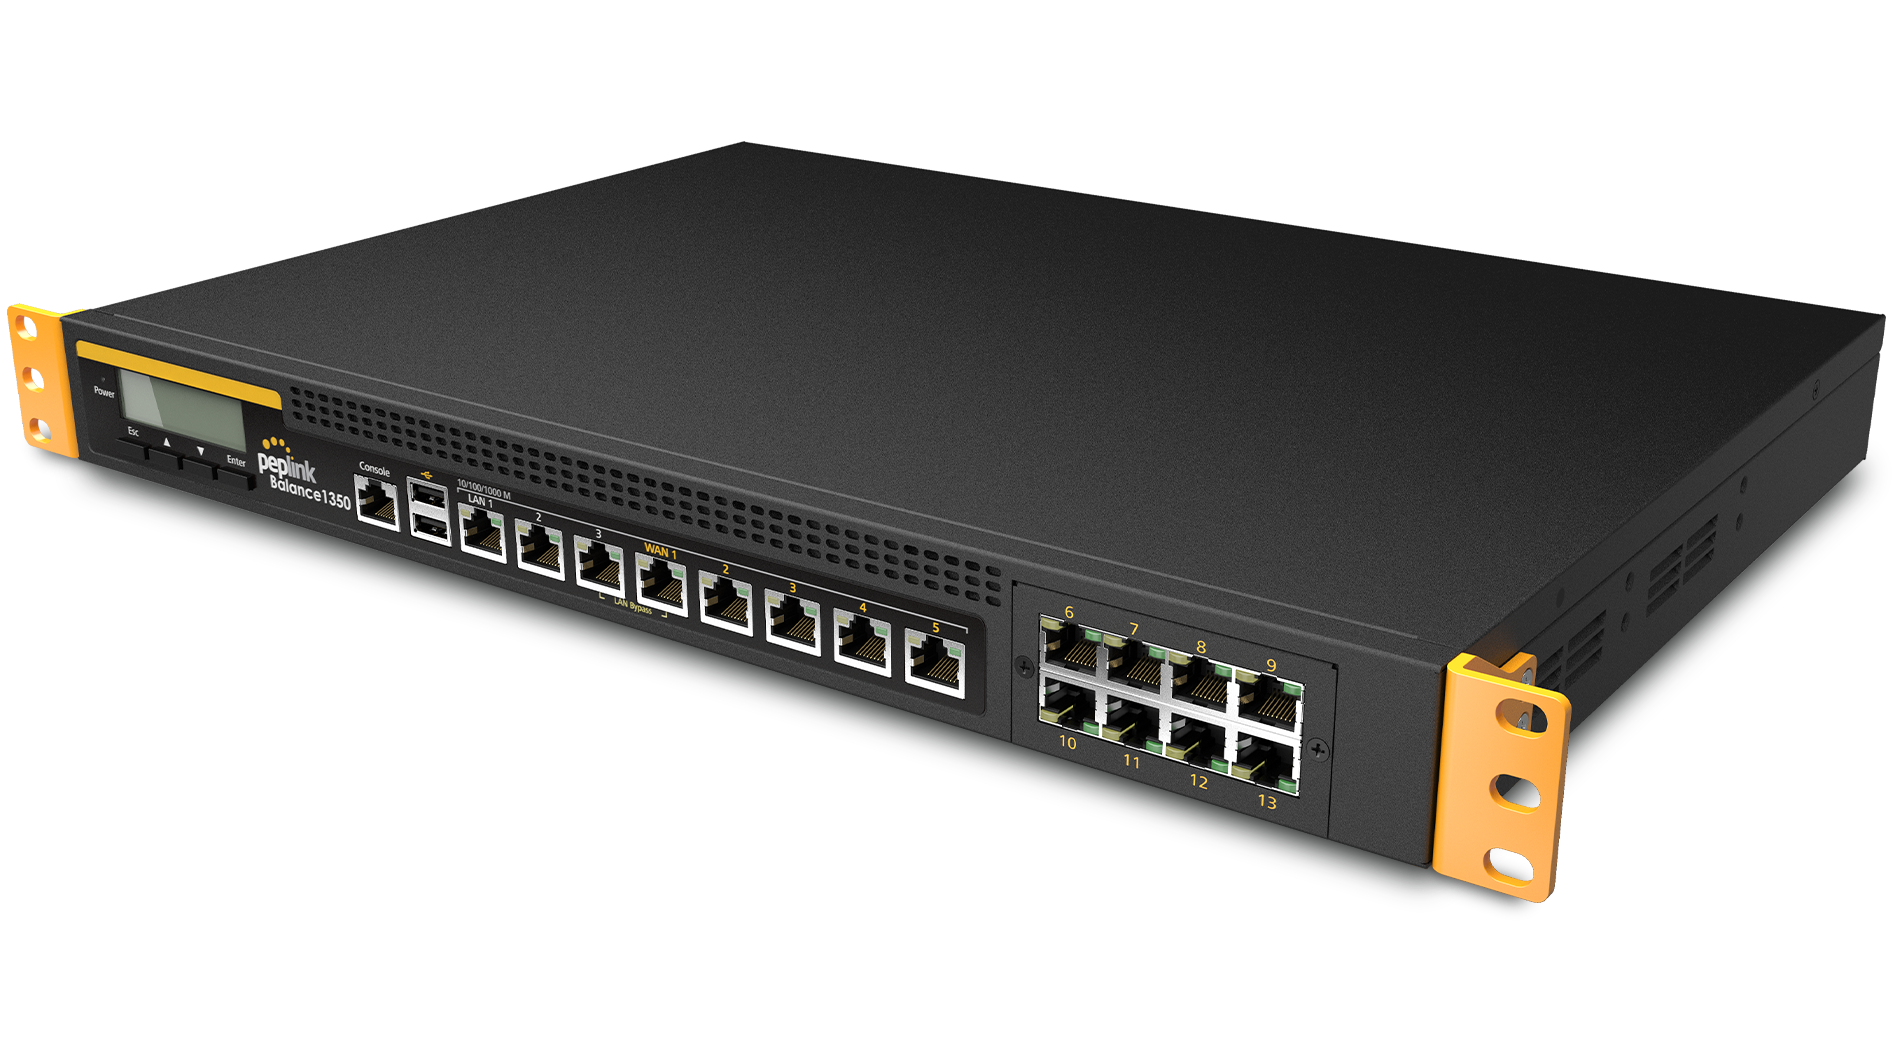 5Gbps Multi-WAN (13 Ports) Router Balance 1350 #2